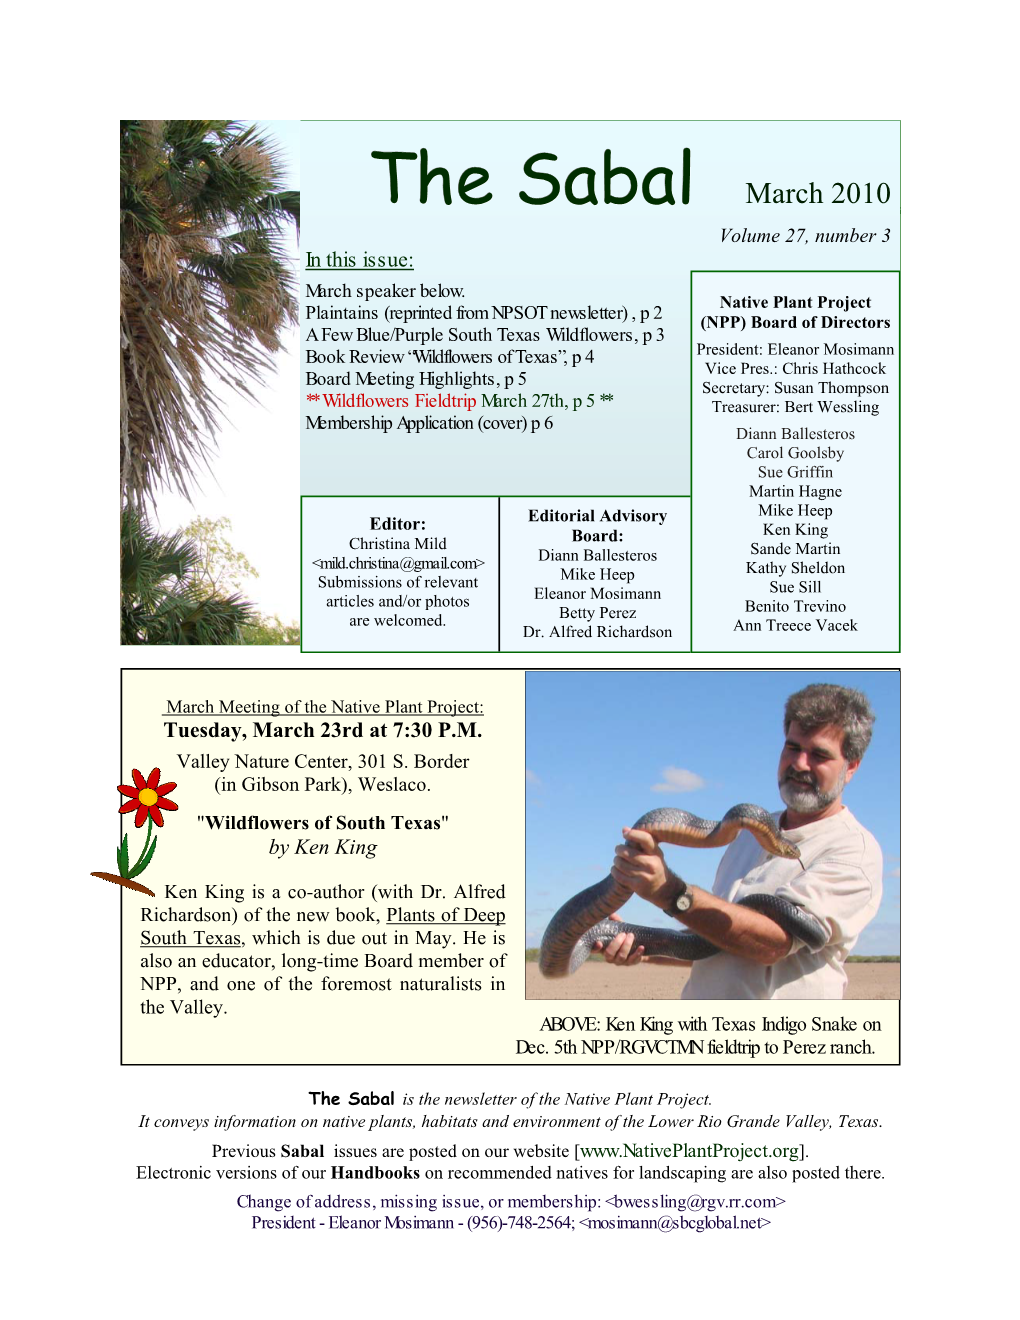 The Sabal March 2010 Volume 27, Number 3 in This Issue